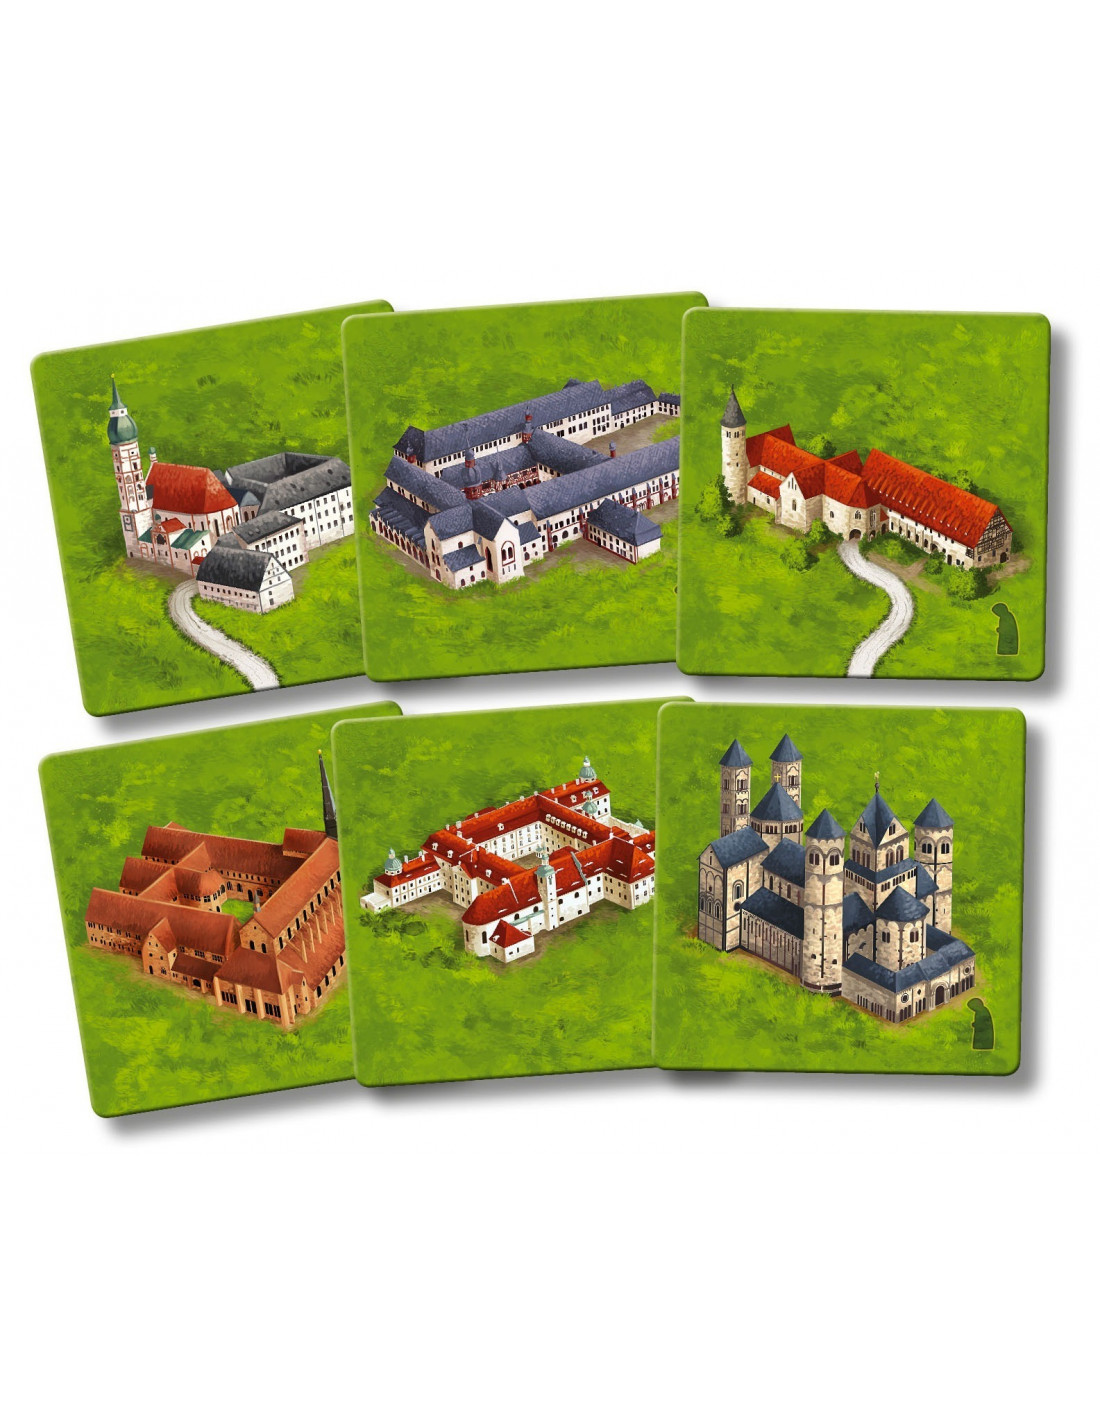 Carcassonne Kloosters Duitsland edition)